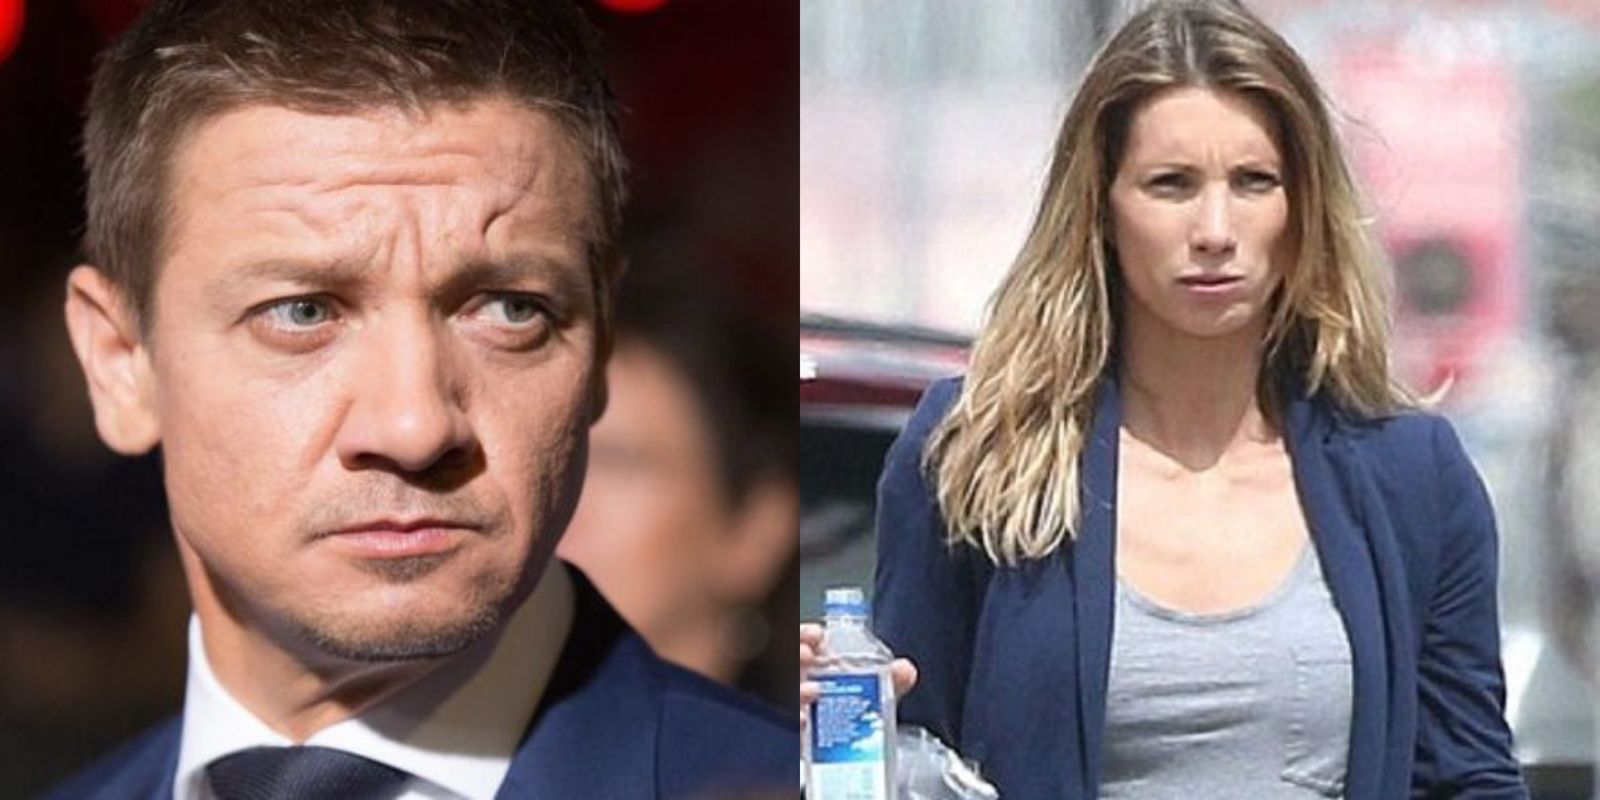 In An Ugly Custody Battle, Jeremy Renner's Ex-Wife Claims He Threatened To Kill Her, The Actor Hits Back Saying She's Mentally Ill